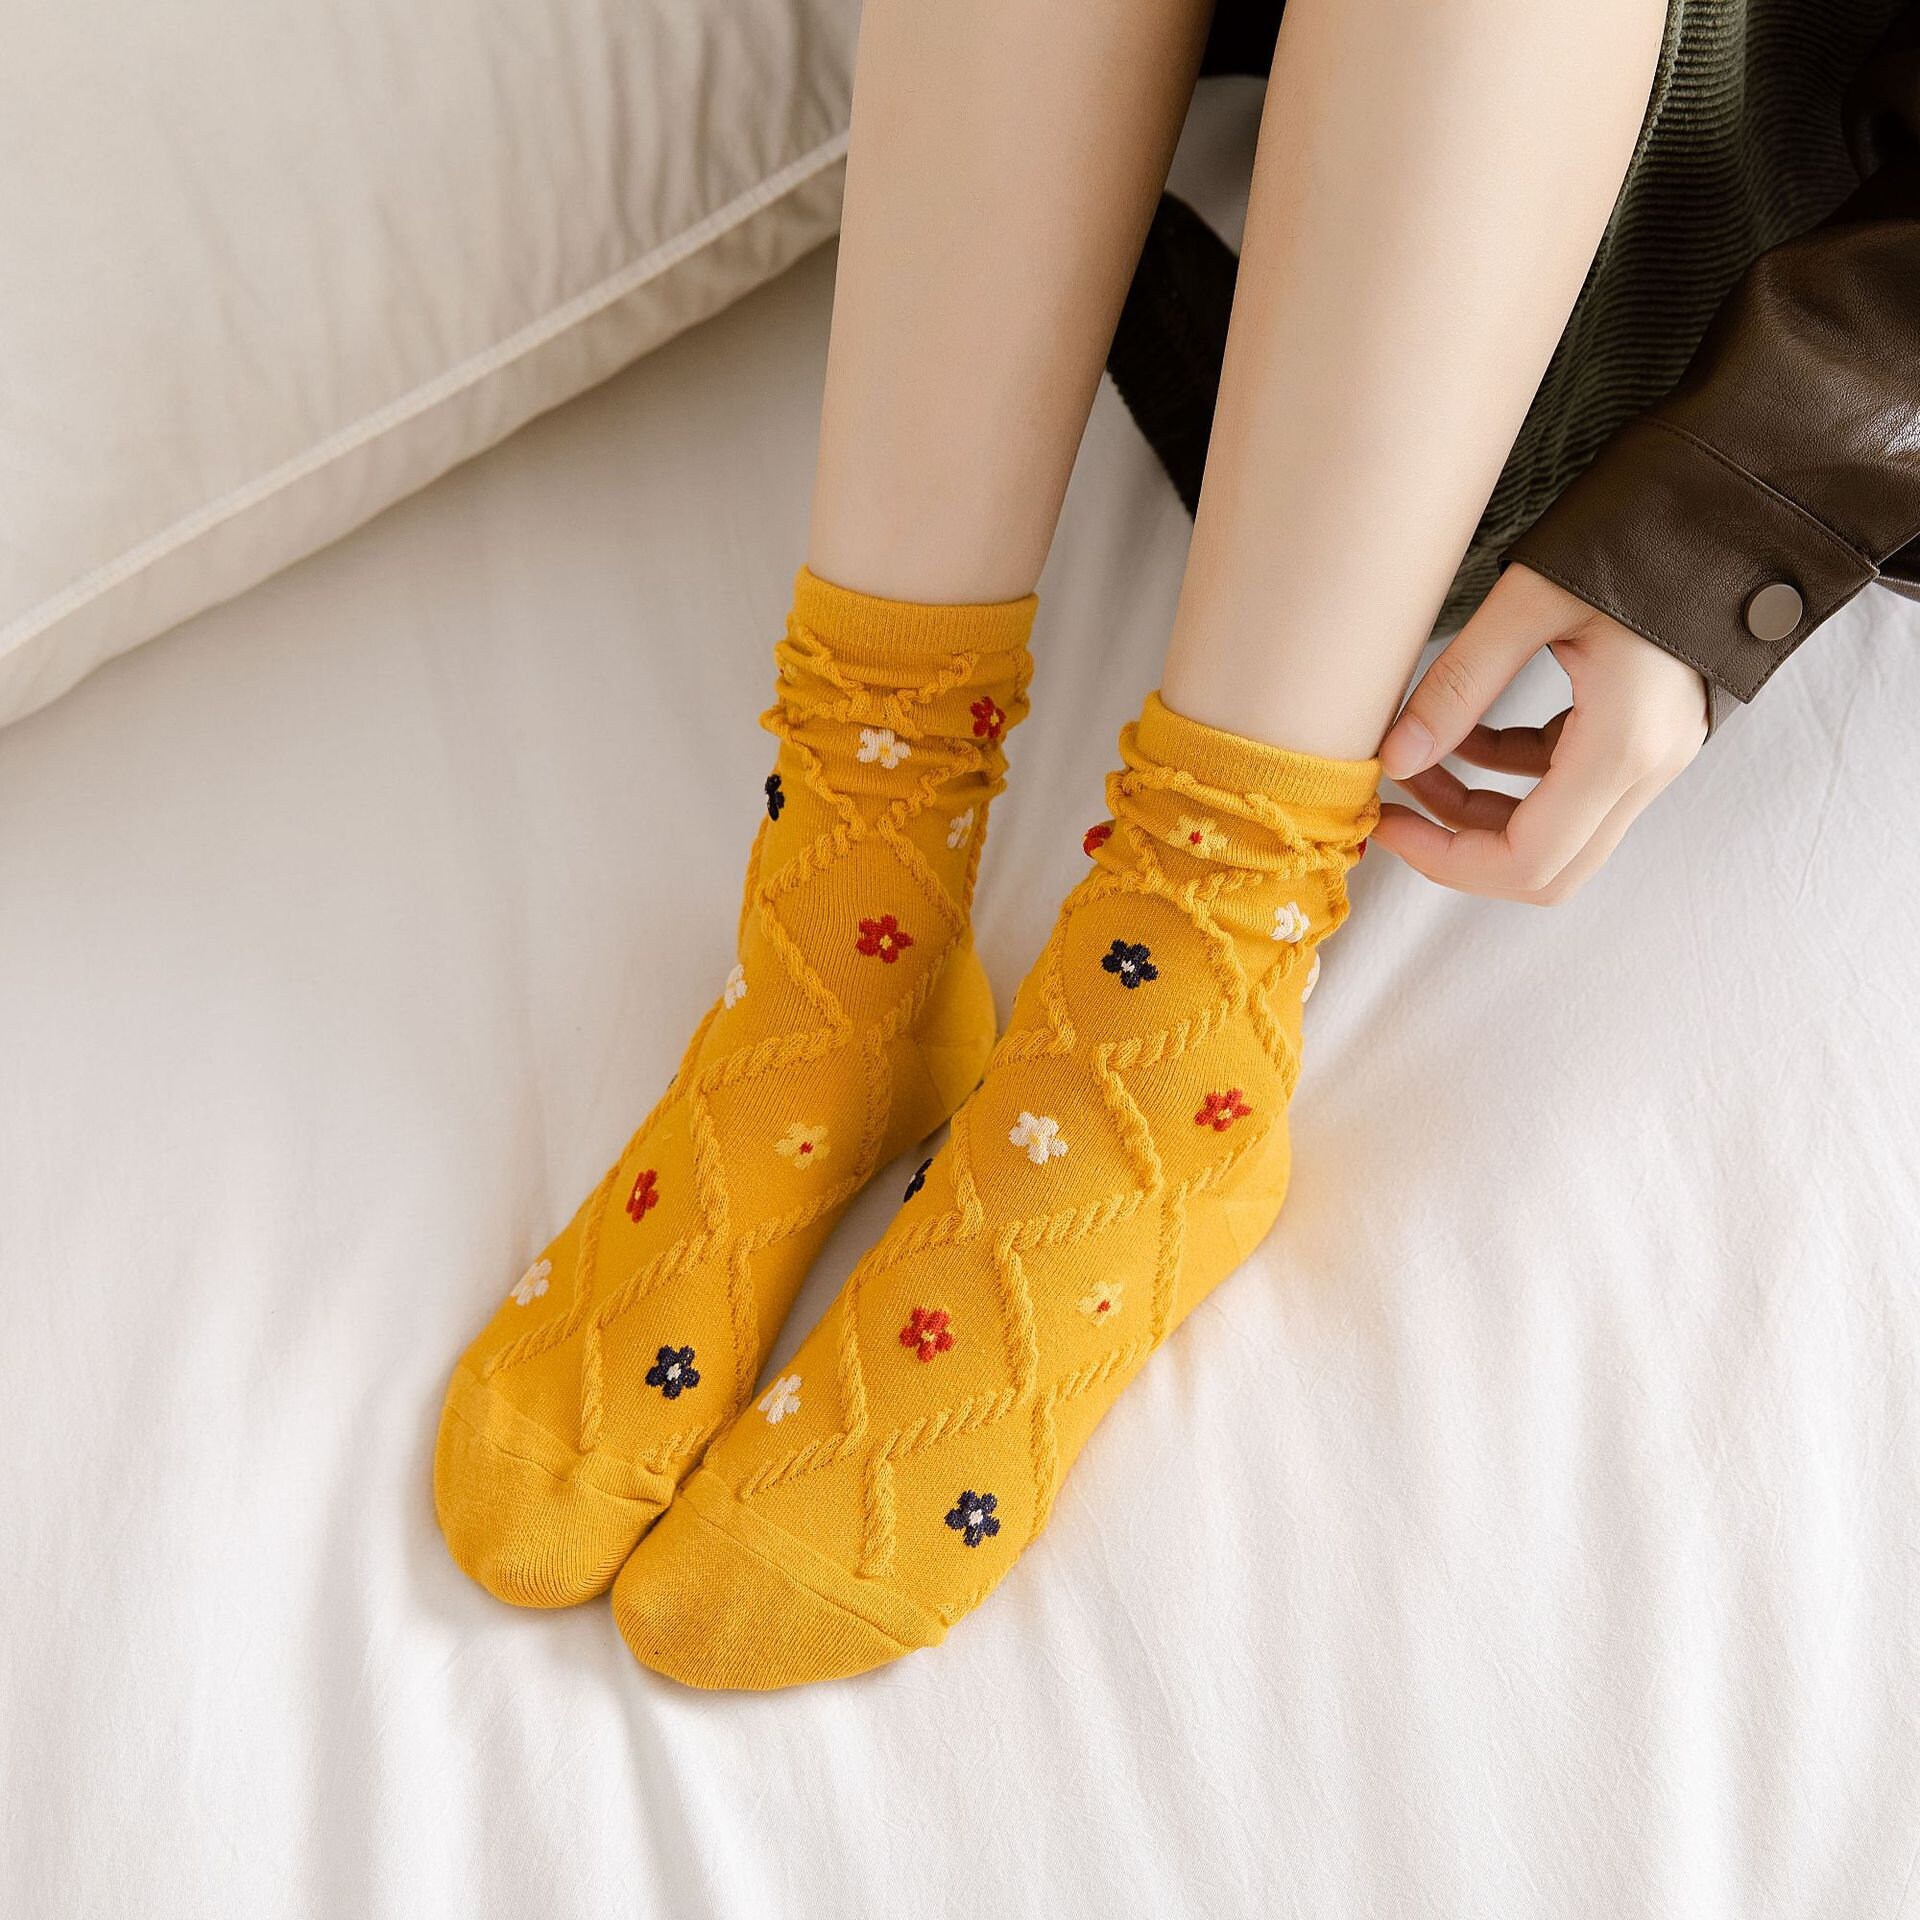 Floral Novelty School Girl Crew Socks Casual Cute Cotton - Etsy